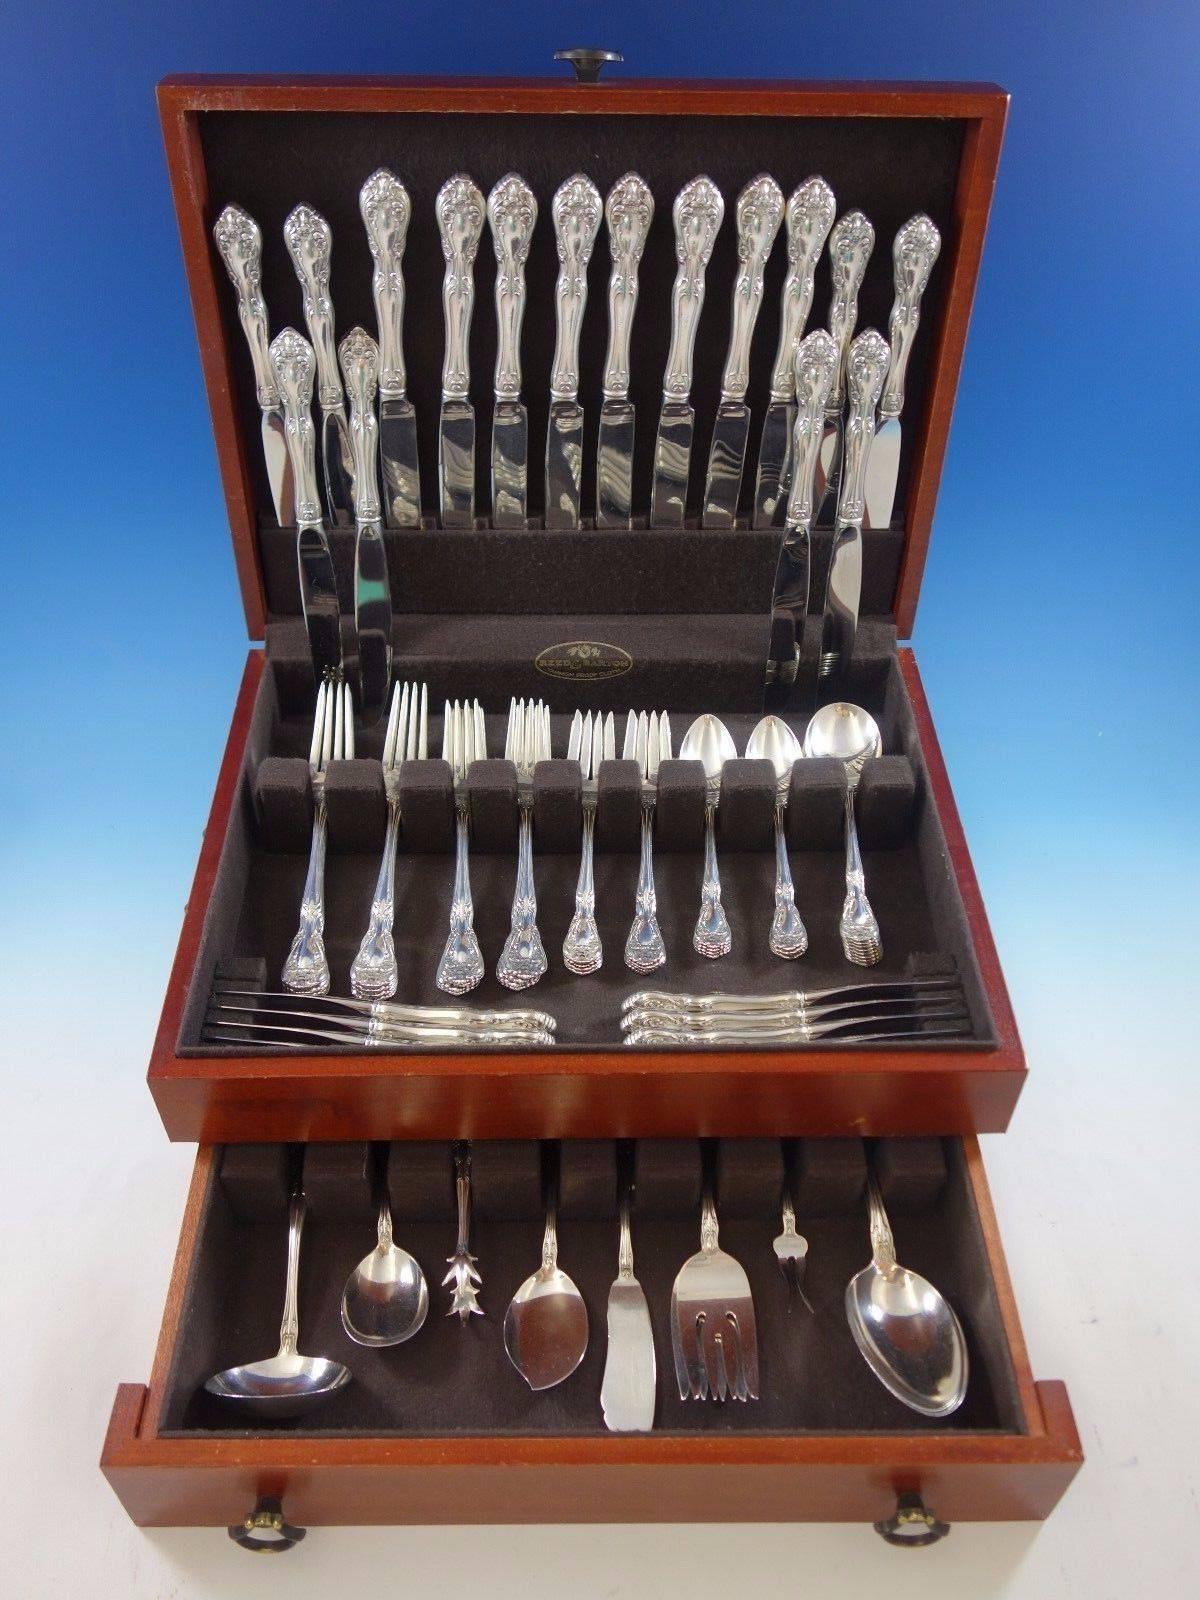 Chateau Rose by Alvin sterling silver flatware set, 74 pieces. This set includes: 

Eight dinner knives, 9 1/2